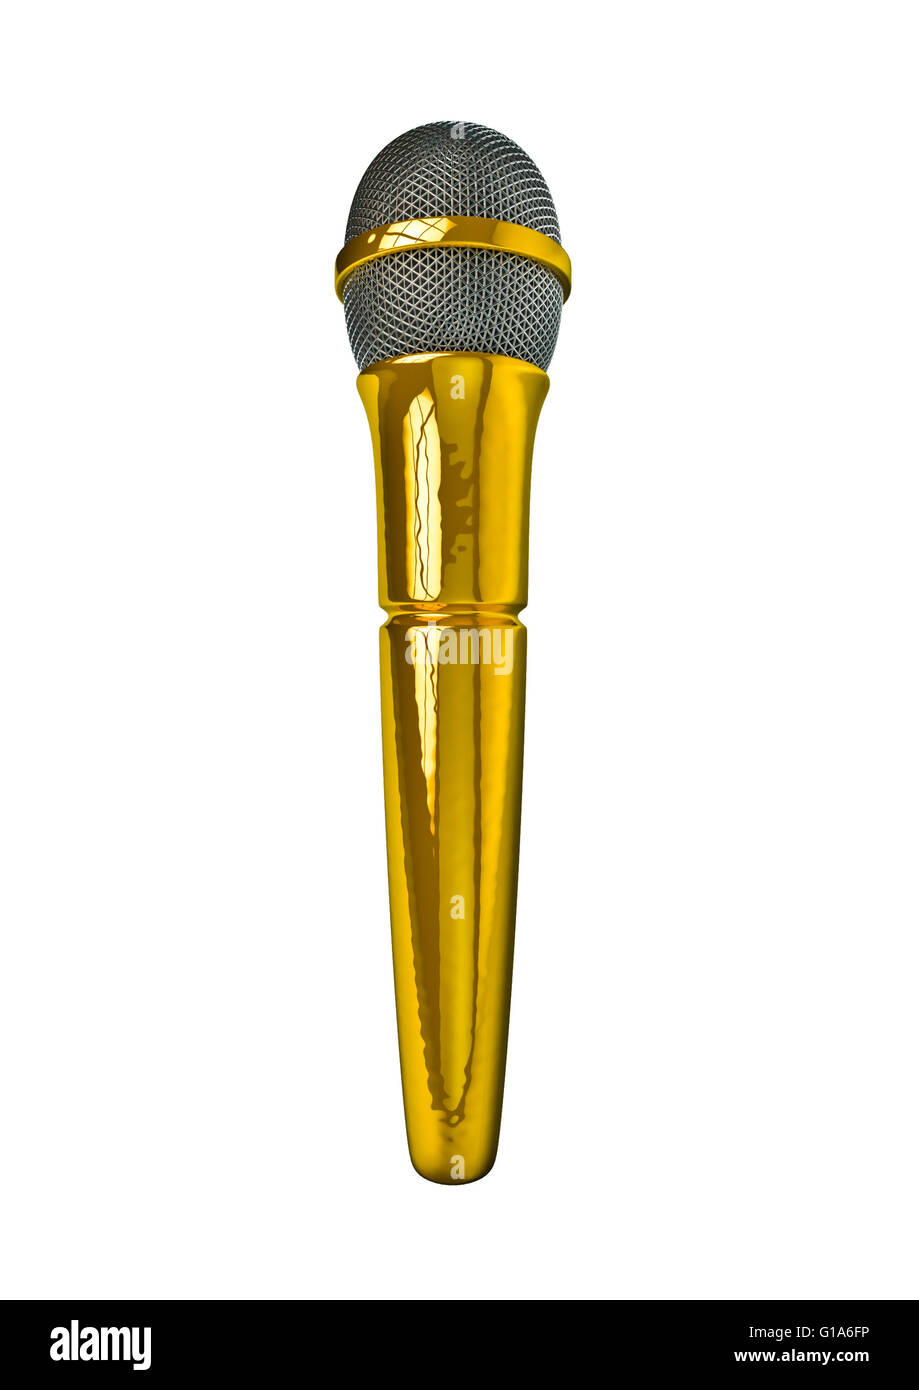 Microphone singer gold / 3D render golden of microphone Stock Photo